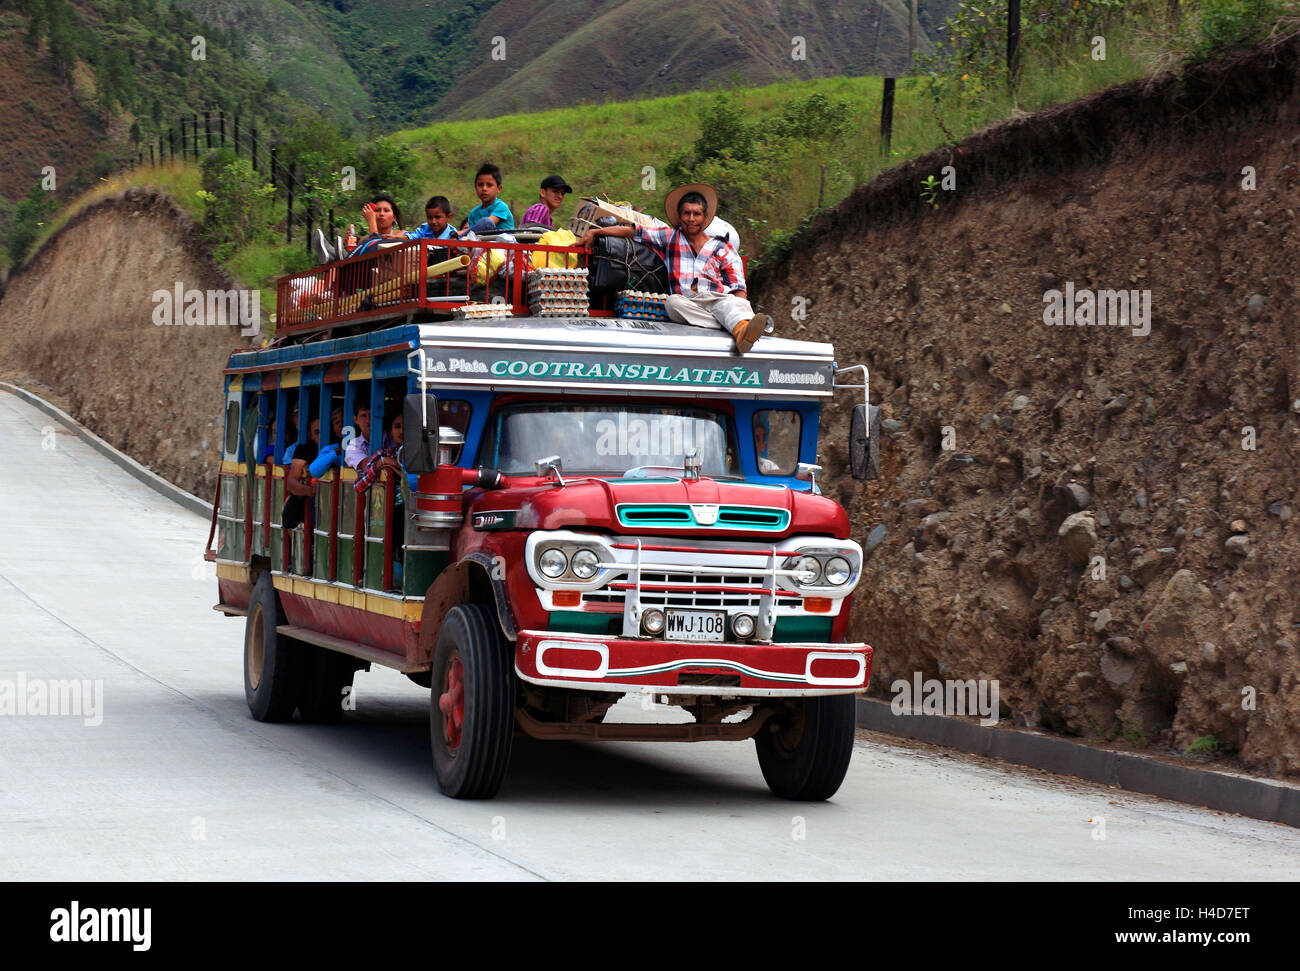 Republic Colombia, department Huila, coach on the country road, passengers, Stock Photo